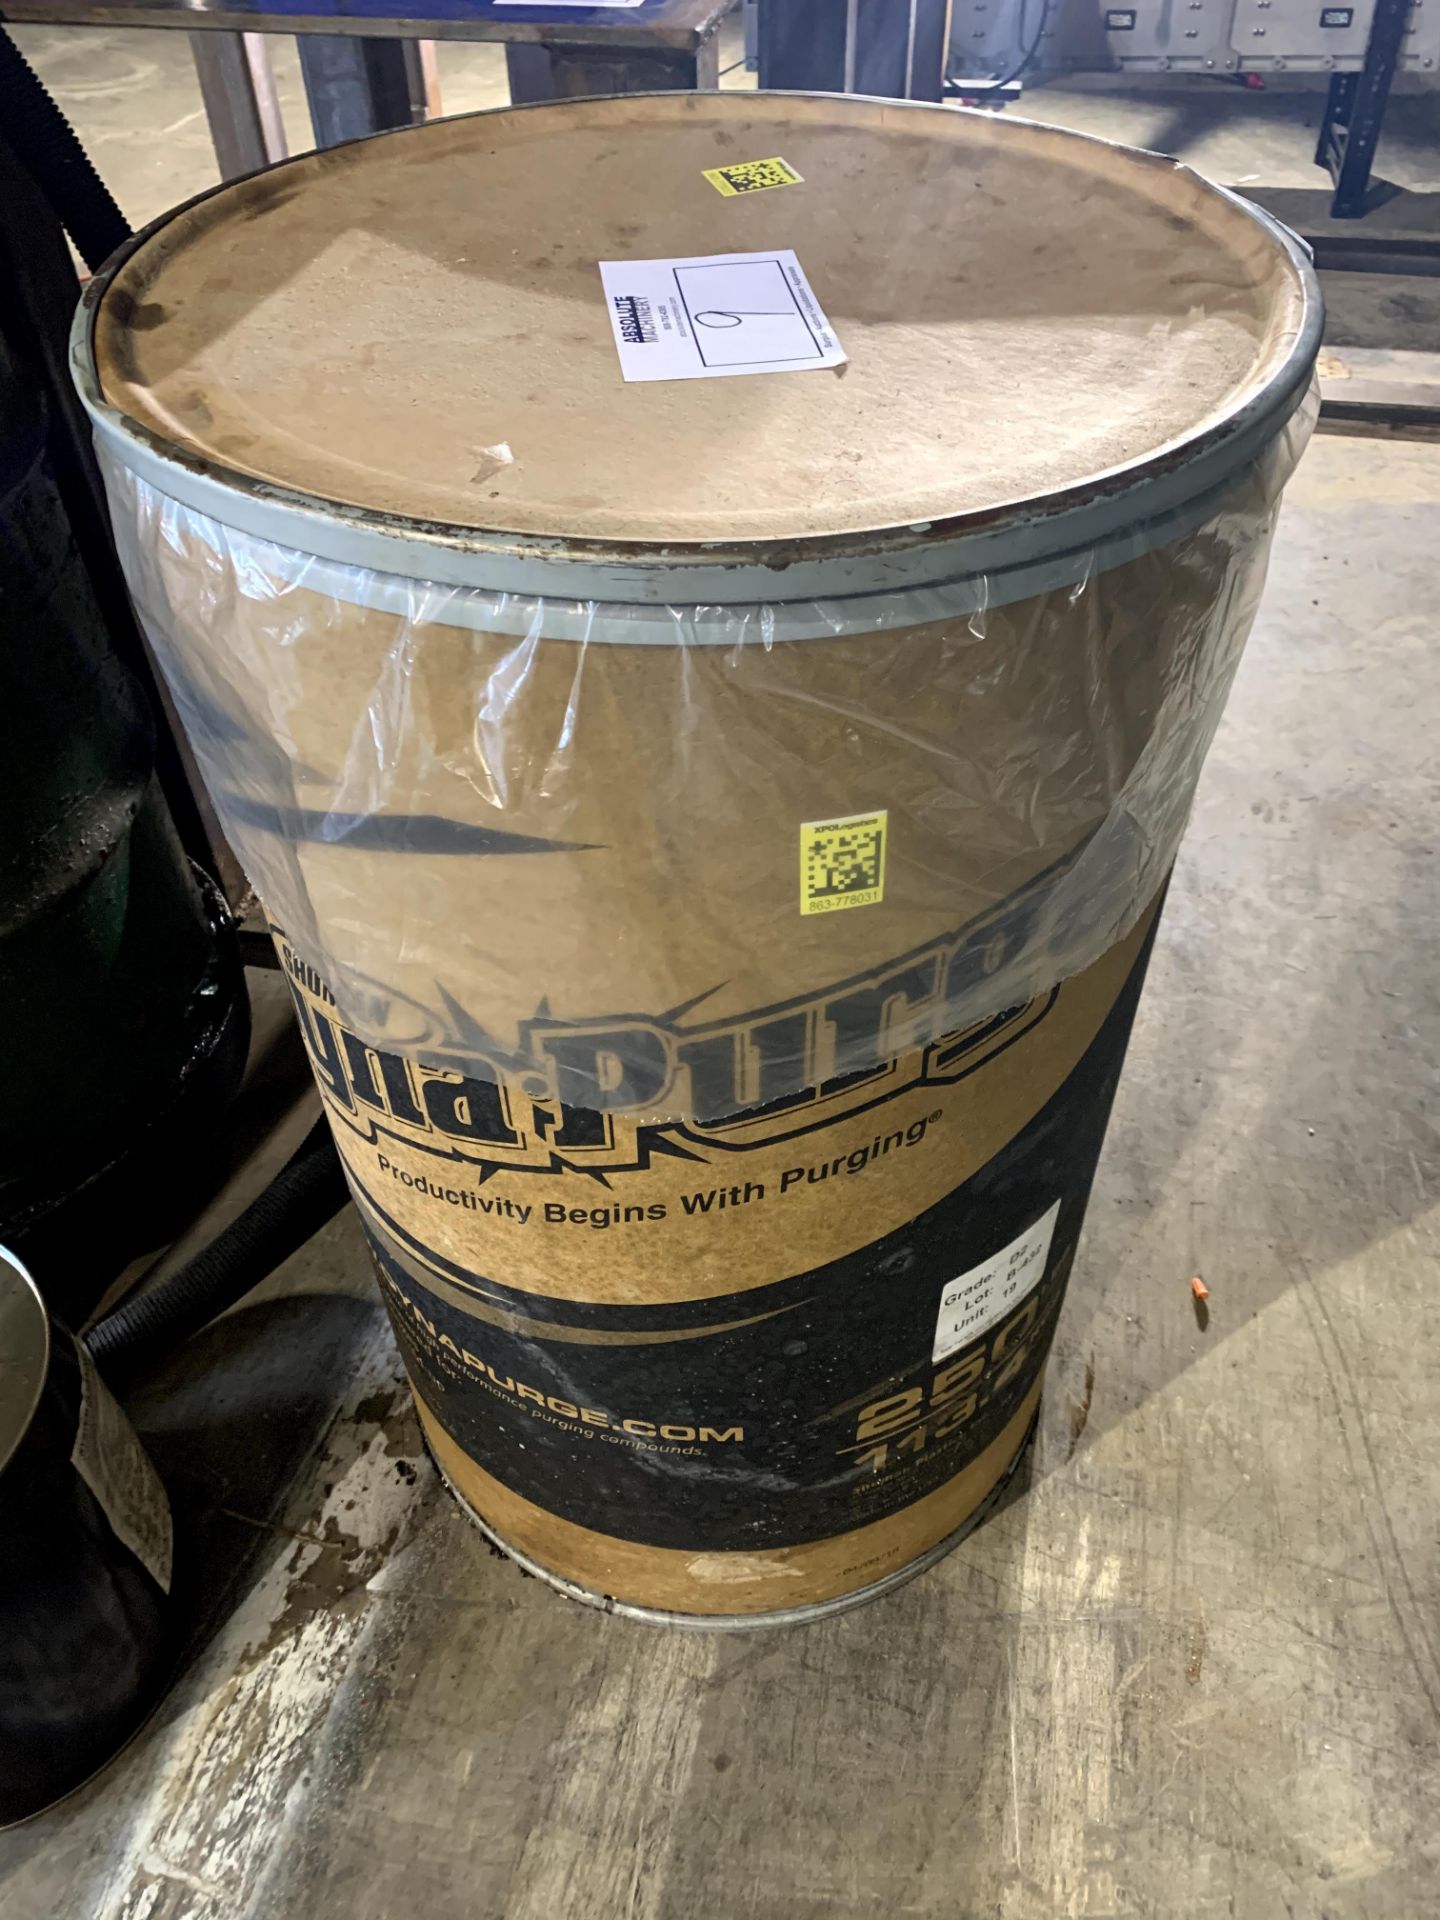 55 Gallon Drum of Dyna Purge Barrel Purging Resin